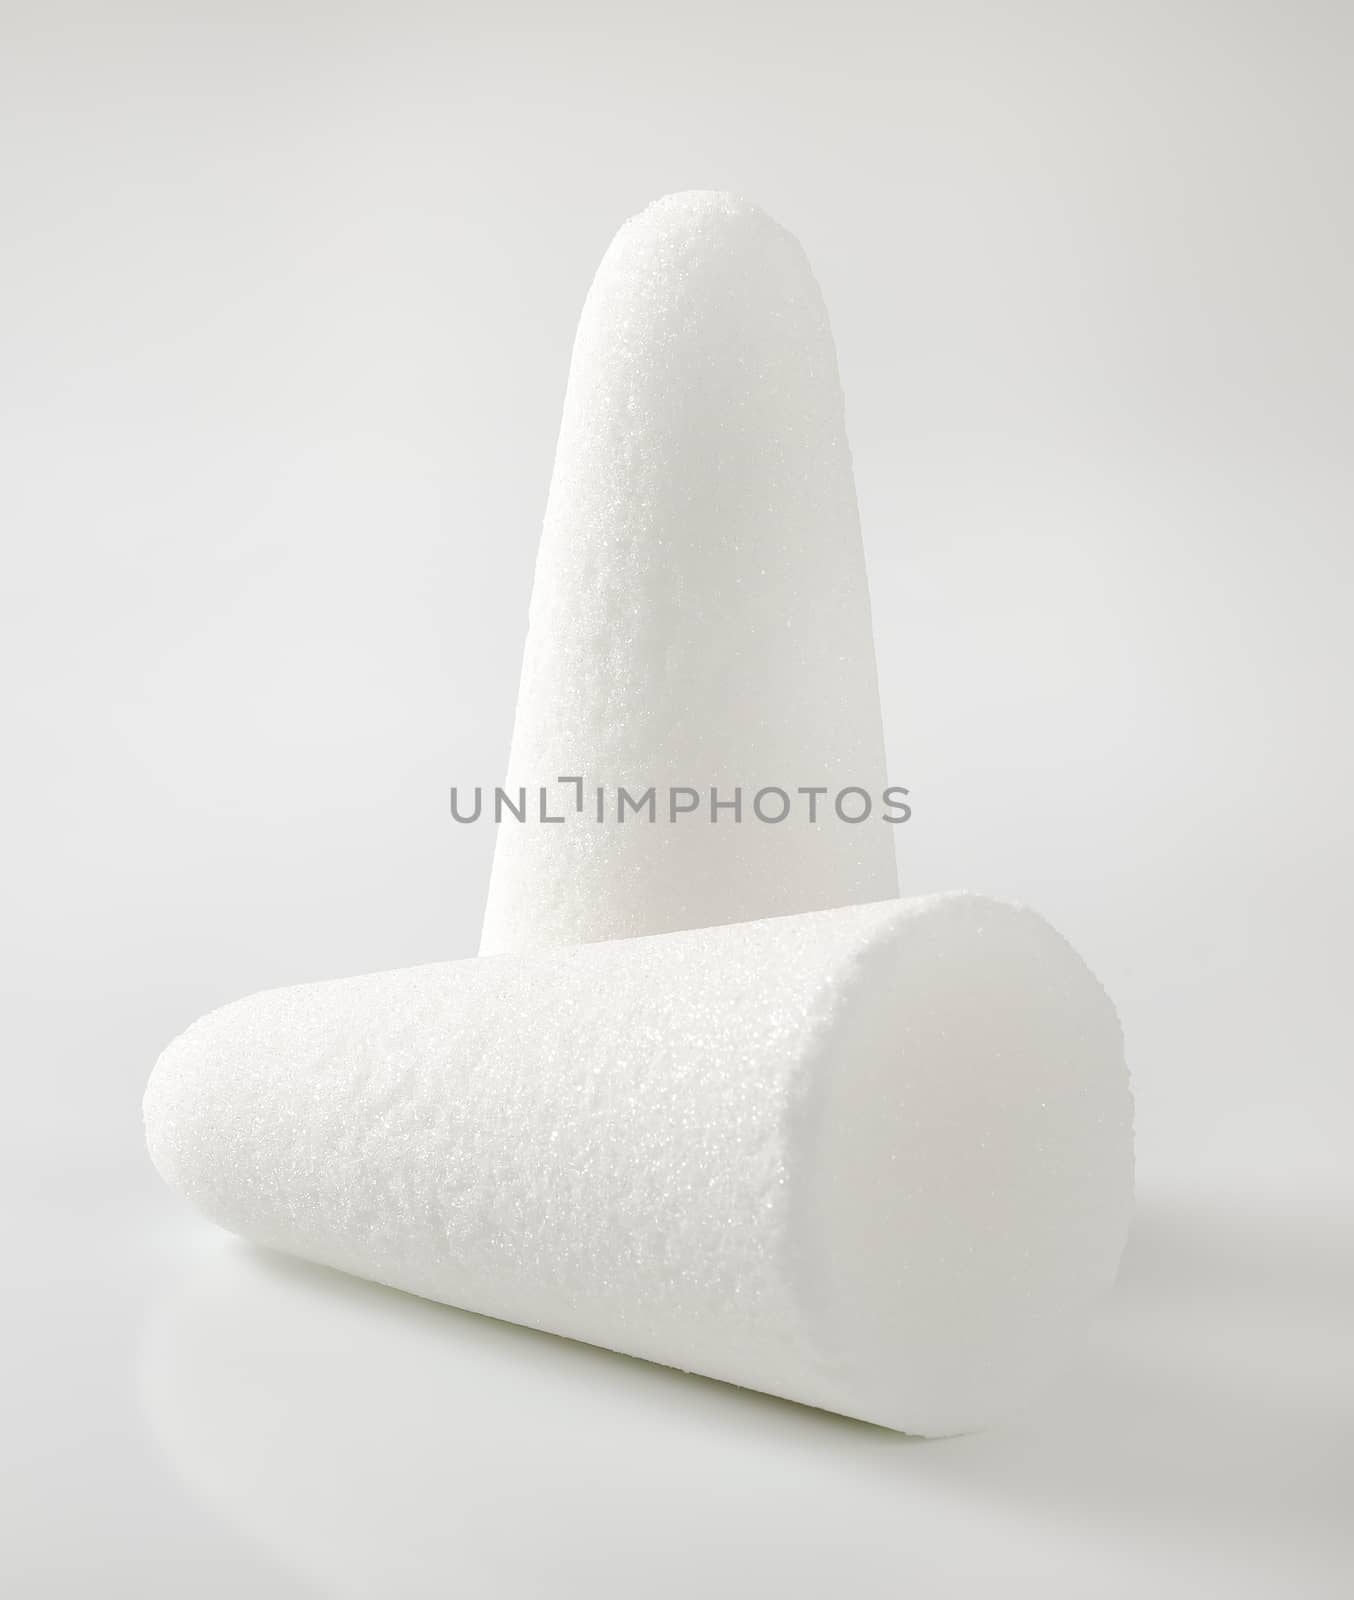 two white sugar loaves or cones on white background